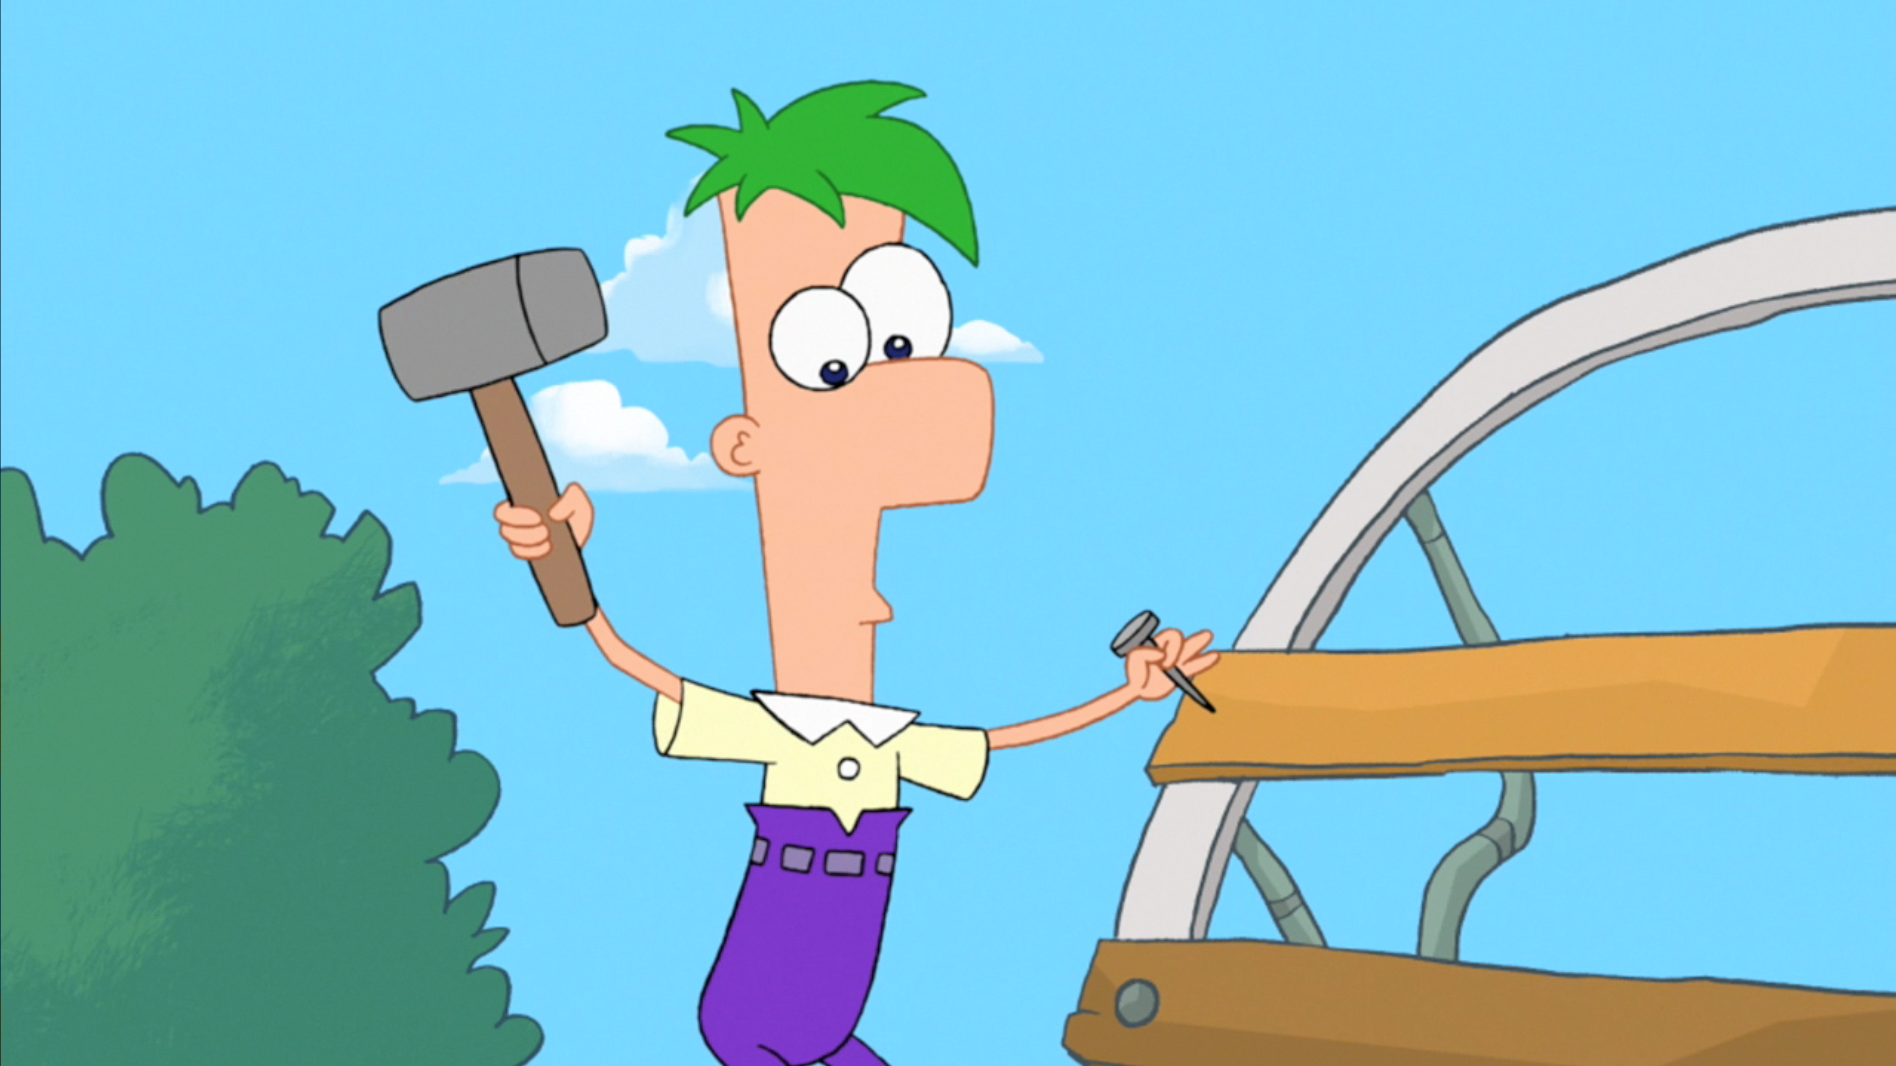 phineas and ferb wallpaper. makeup Phineas Ferb Isabella Perry phineas and ferb wallpaper.